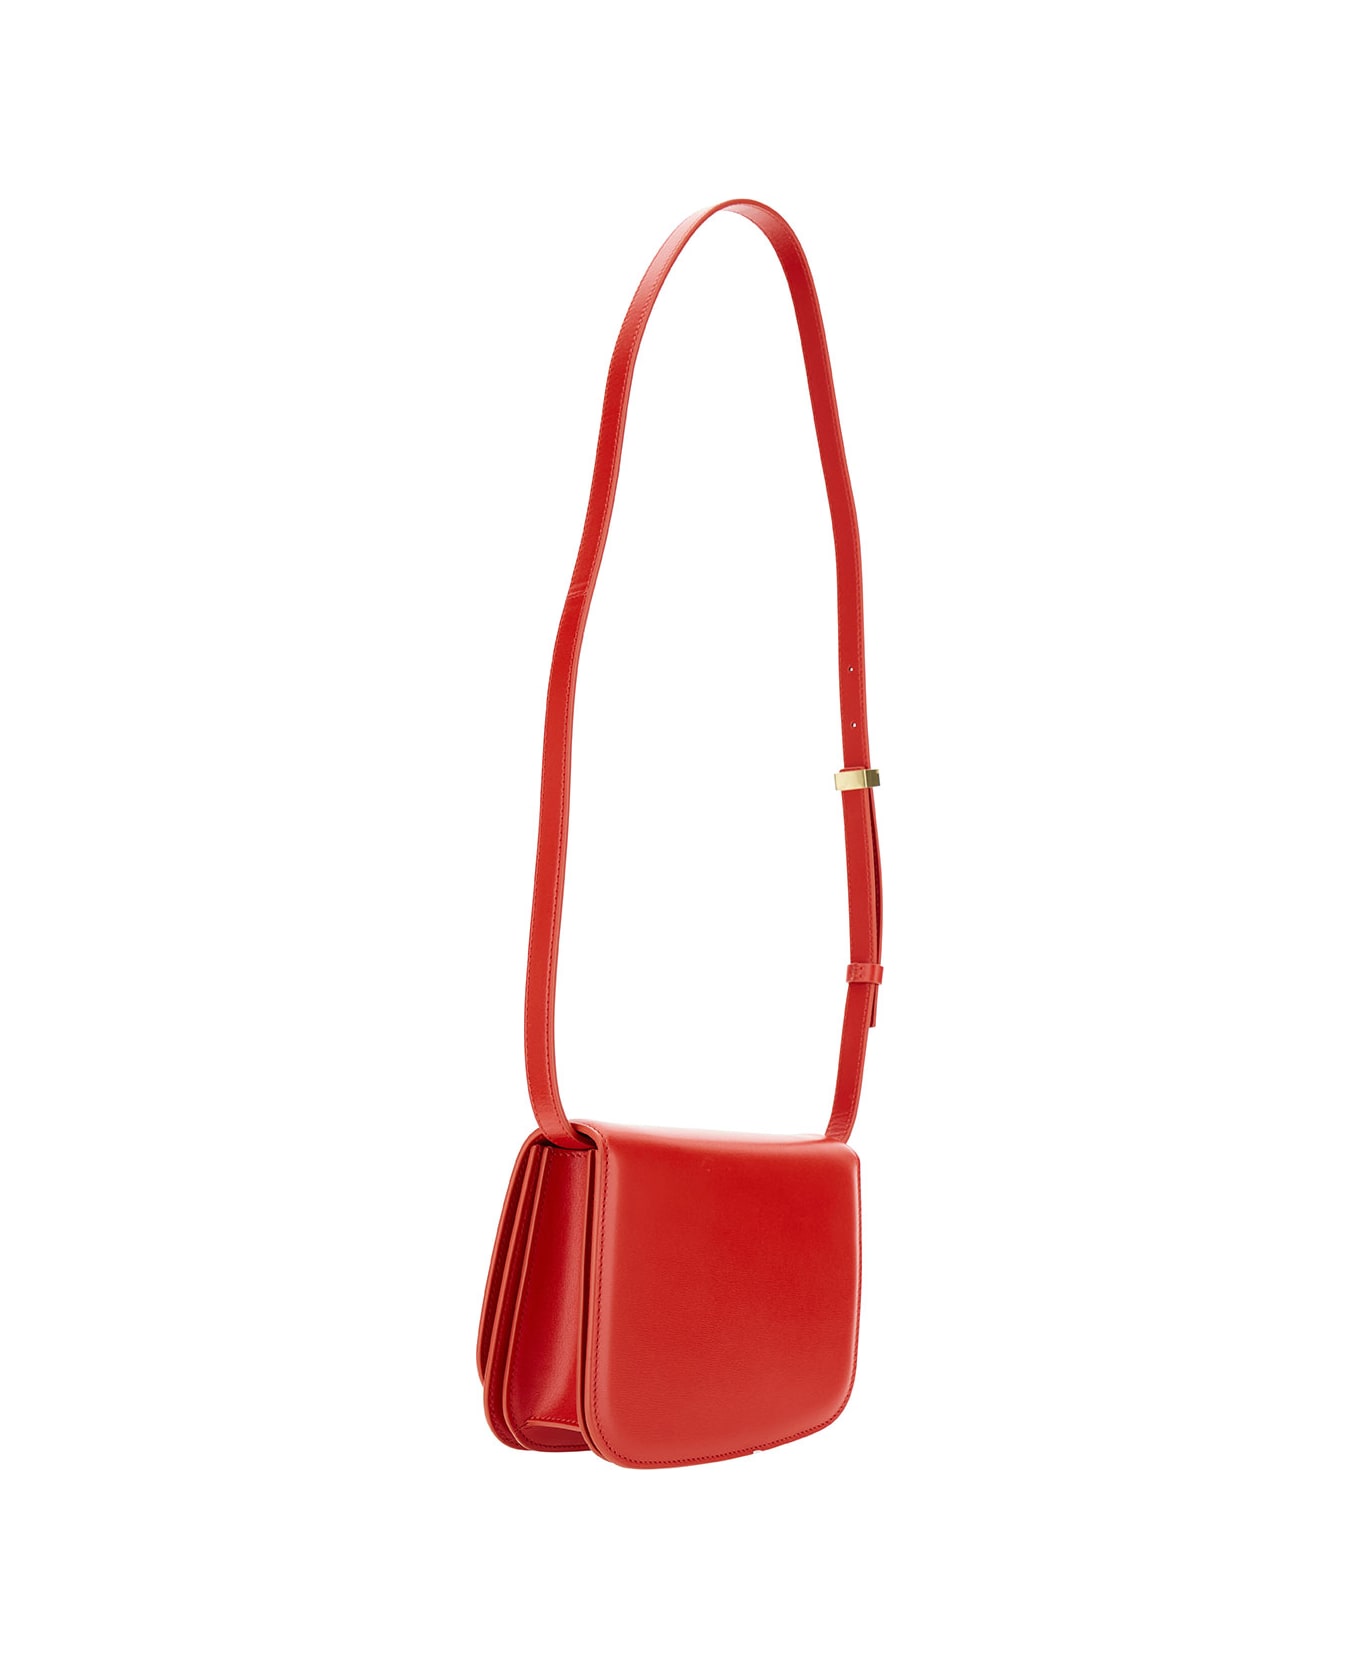 Ferragamo 'oyster' Red Asymmetric Crossbody Bag With Logo Detail In Leather Woman - Red トートバッグ